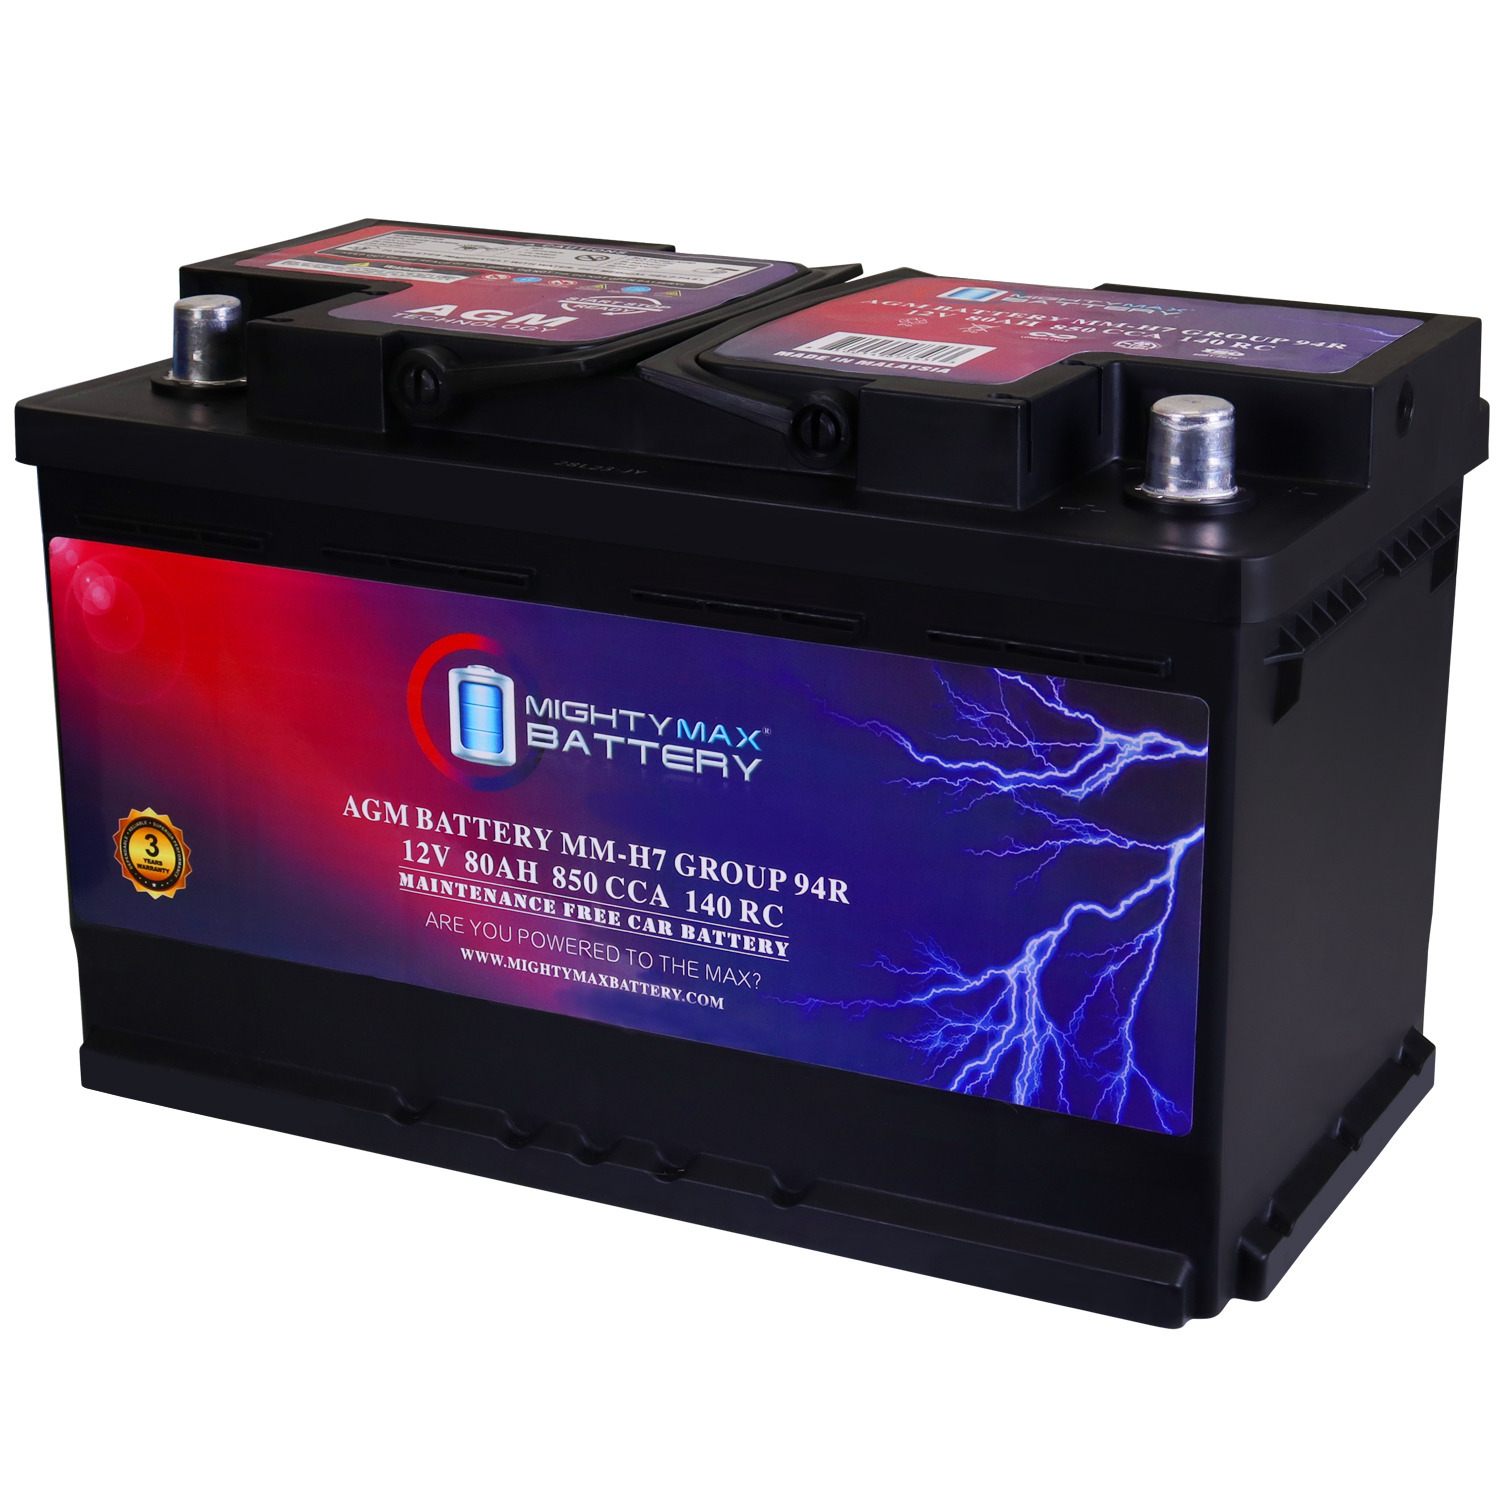 MM-H7 Group 94R 12V 80AH 140RC 850 CCA Replacement Battery Compatible with GMC Sierra 1500 1/2 Ton 14-21